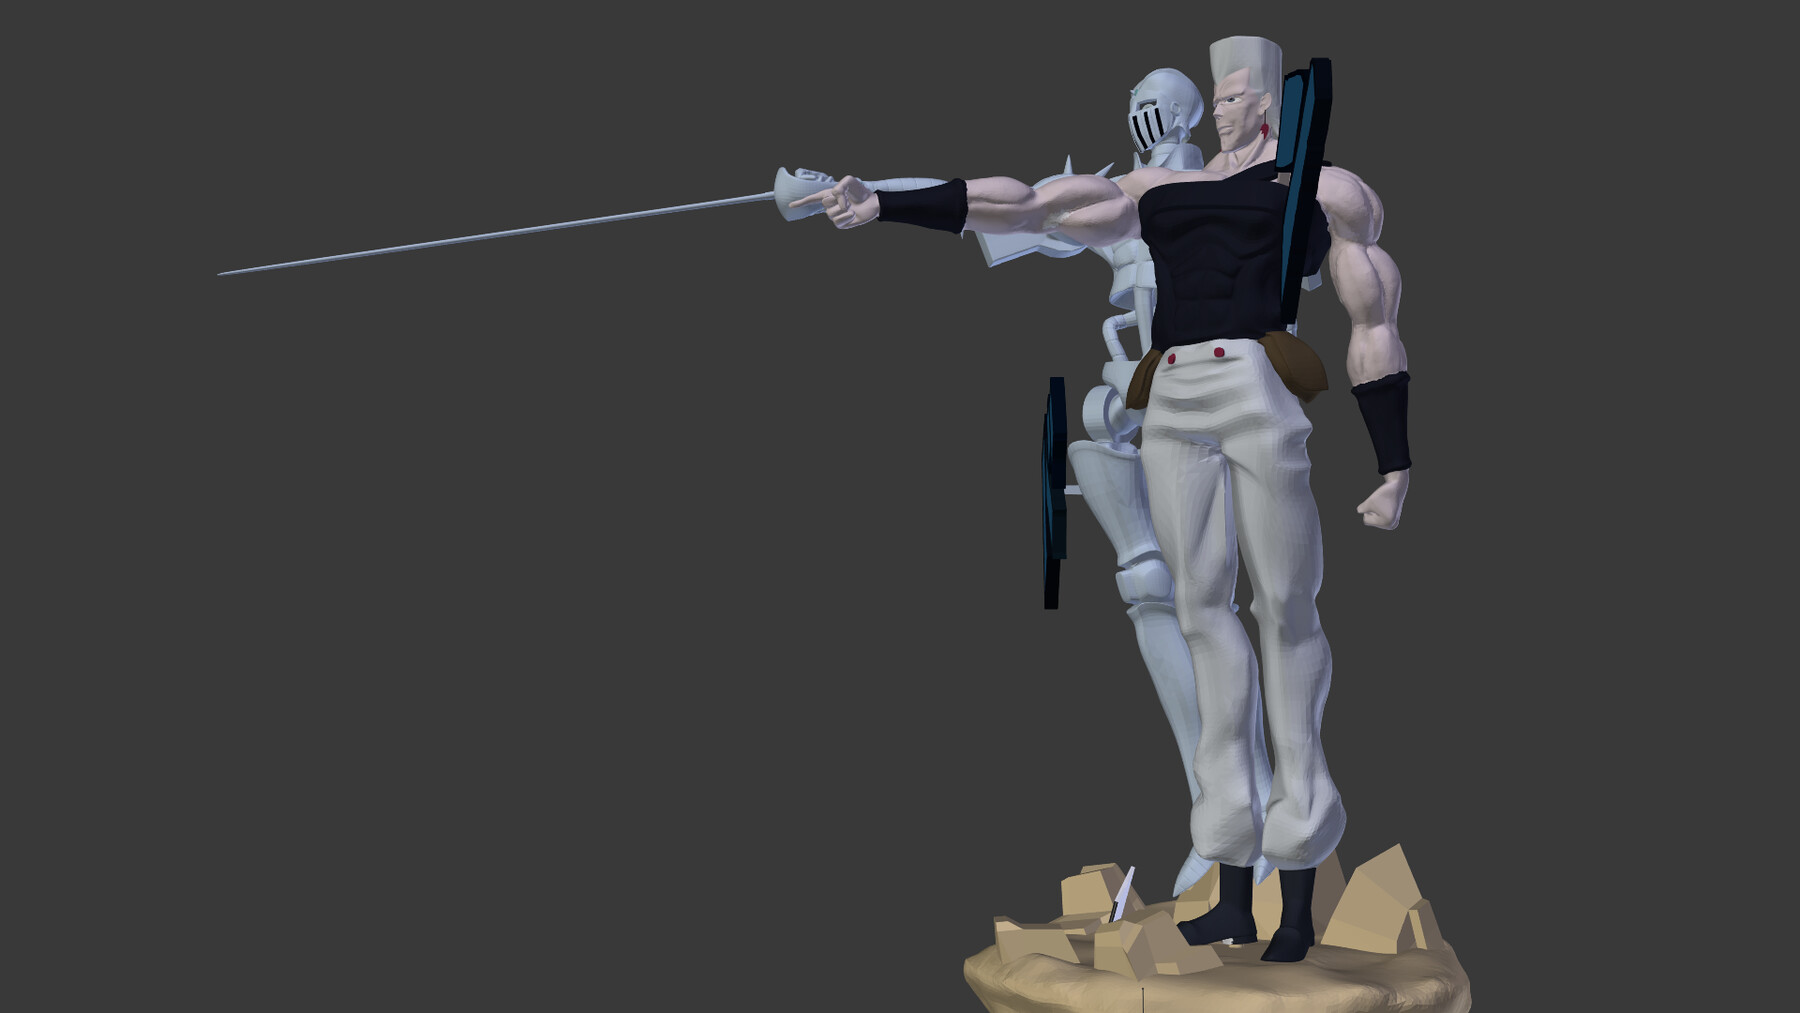 Polnareff and Silver Chariot 3D model 3D printable